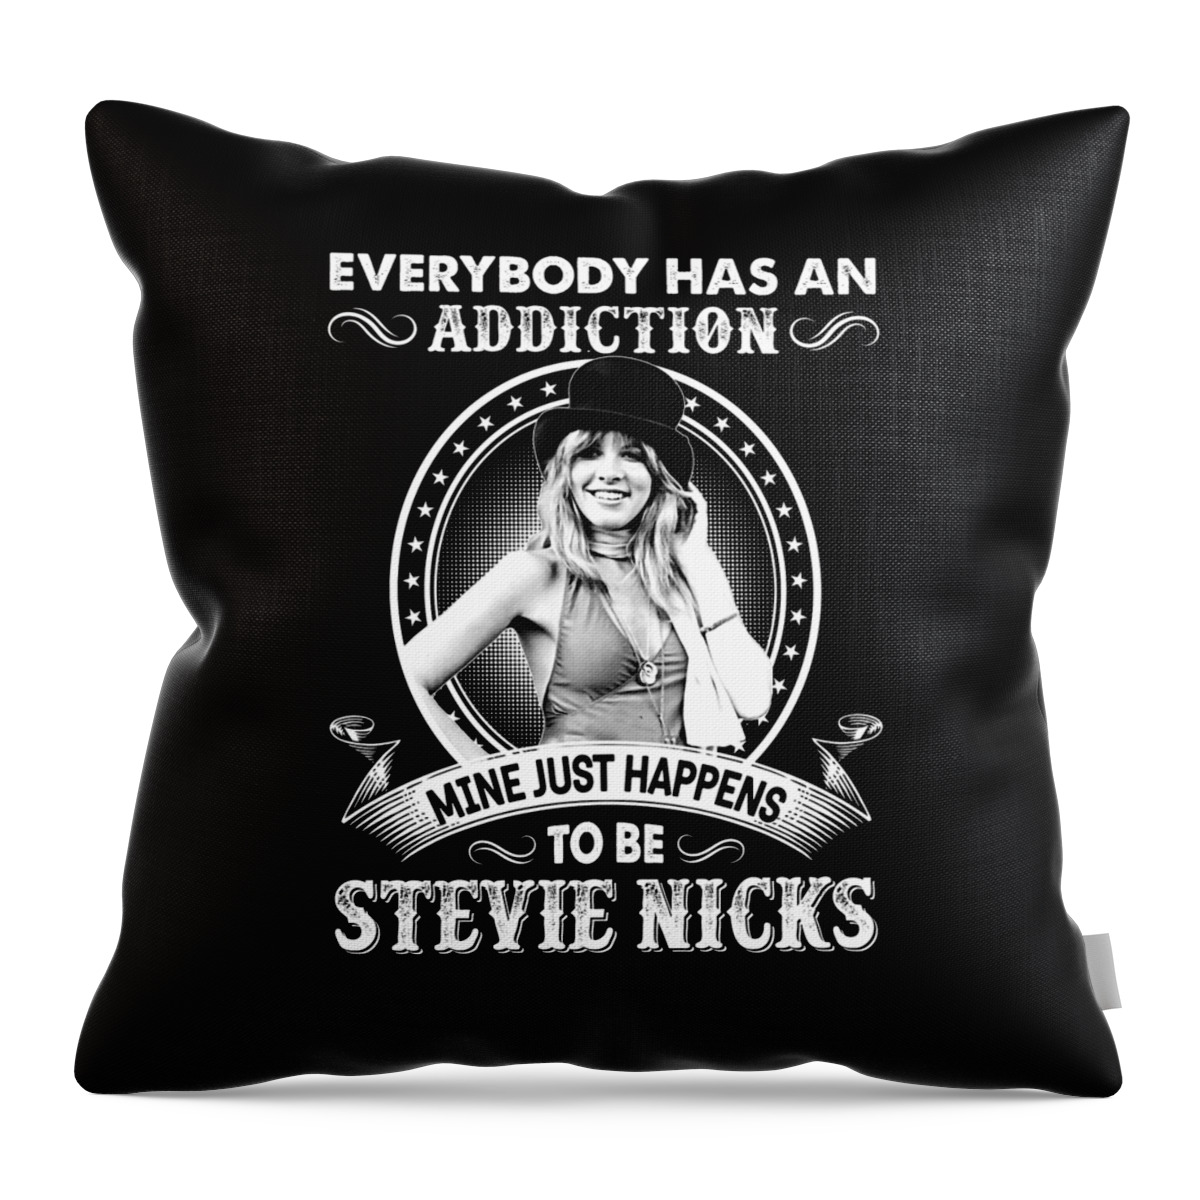 Stevie Nicks Throw Pillow featuring the digital art Everybody Has An Addiction Mine Just Happens To Be Stevie Nicks by Notorious Artist